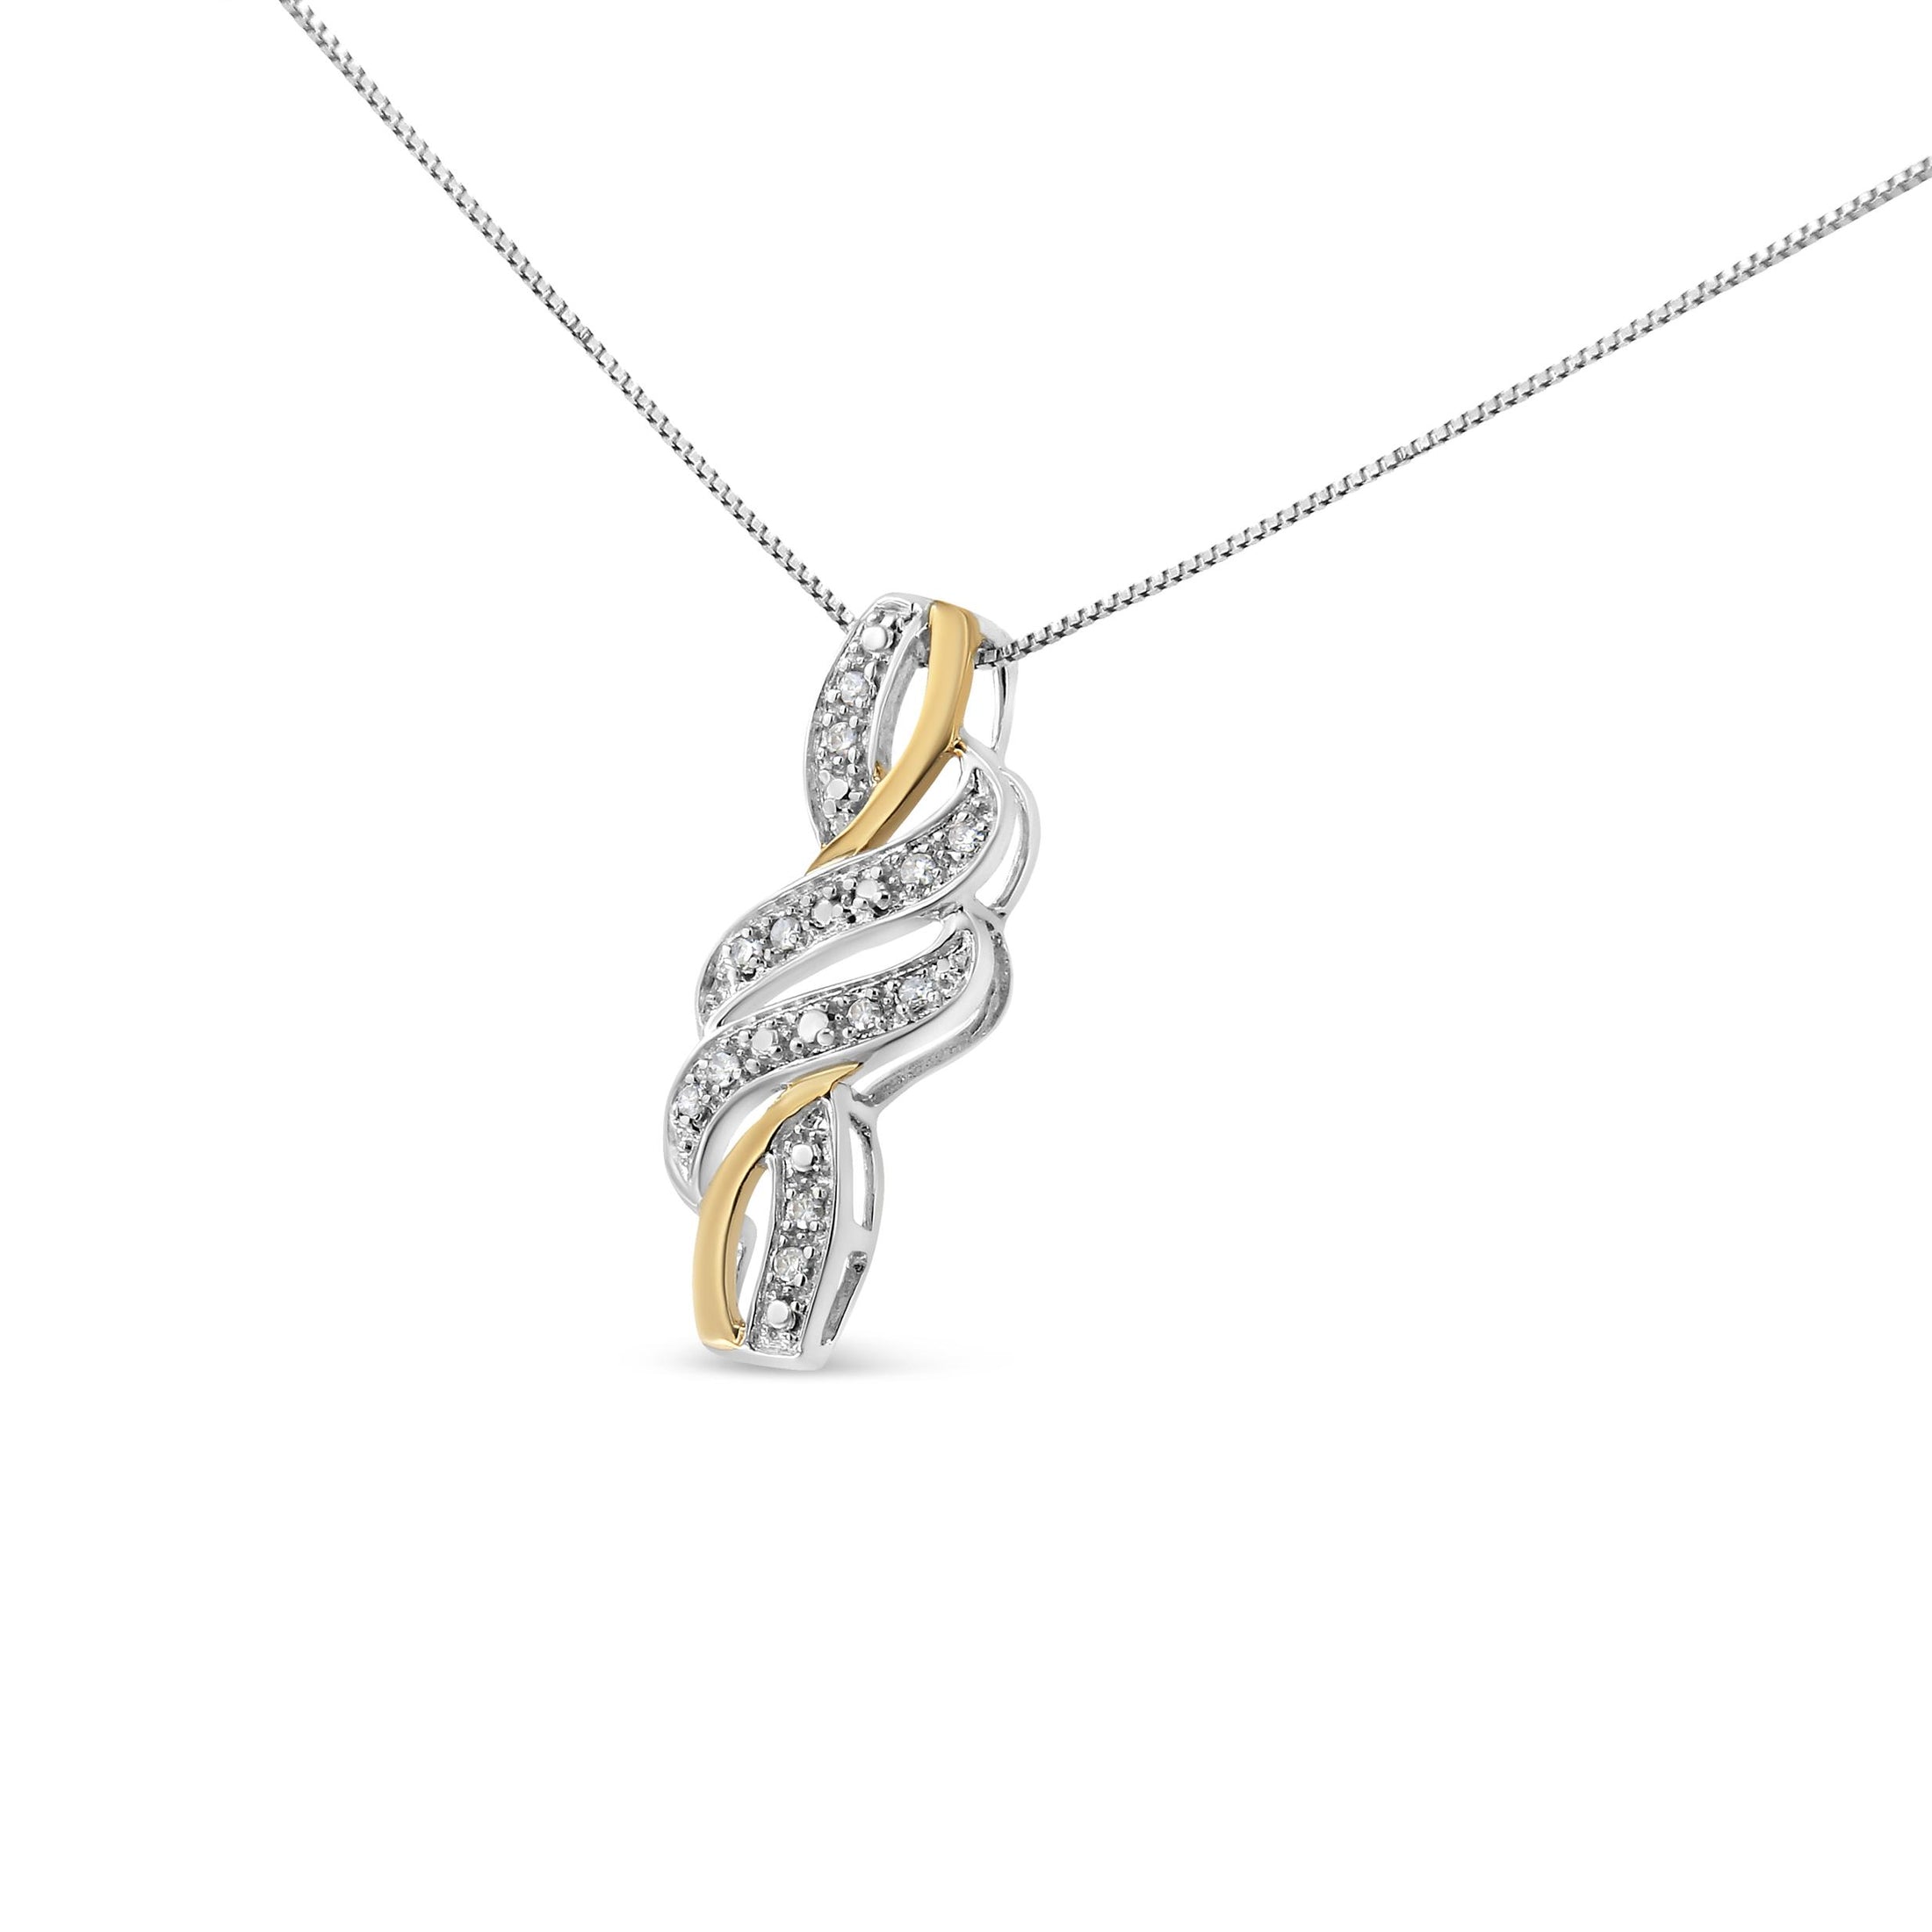 10K Yellow Gold Plated .925 Sterling Silver 1/20 cttw Round Cut Diamond Swirl Pendant Necklace